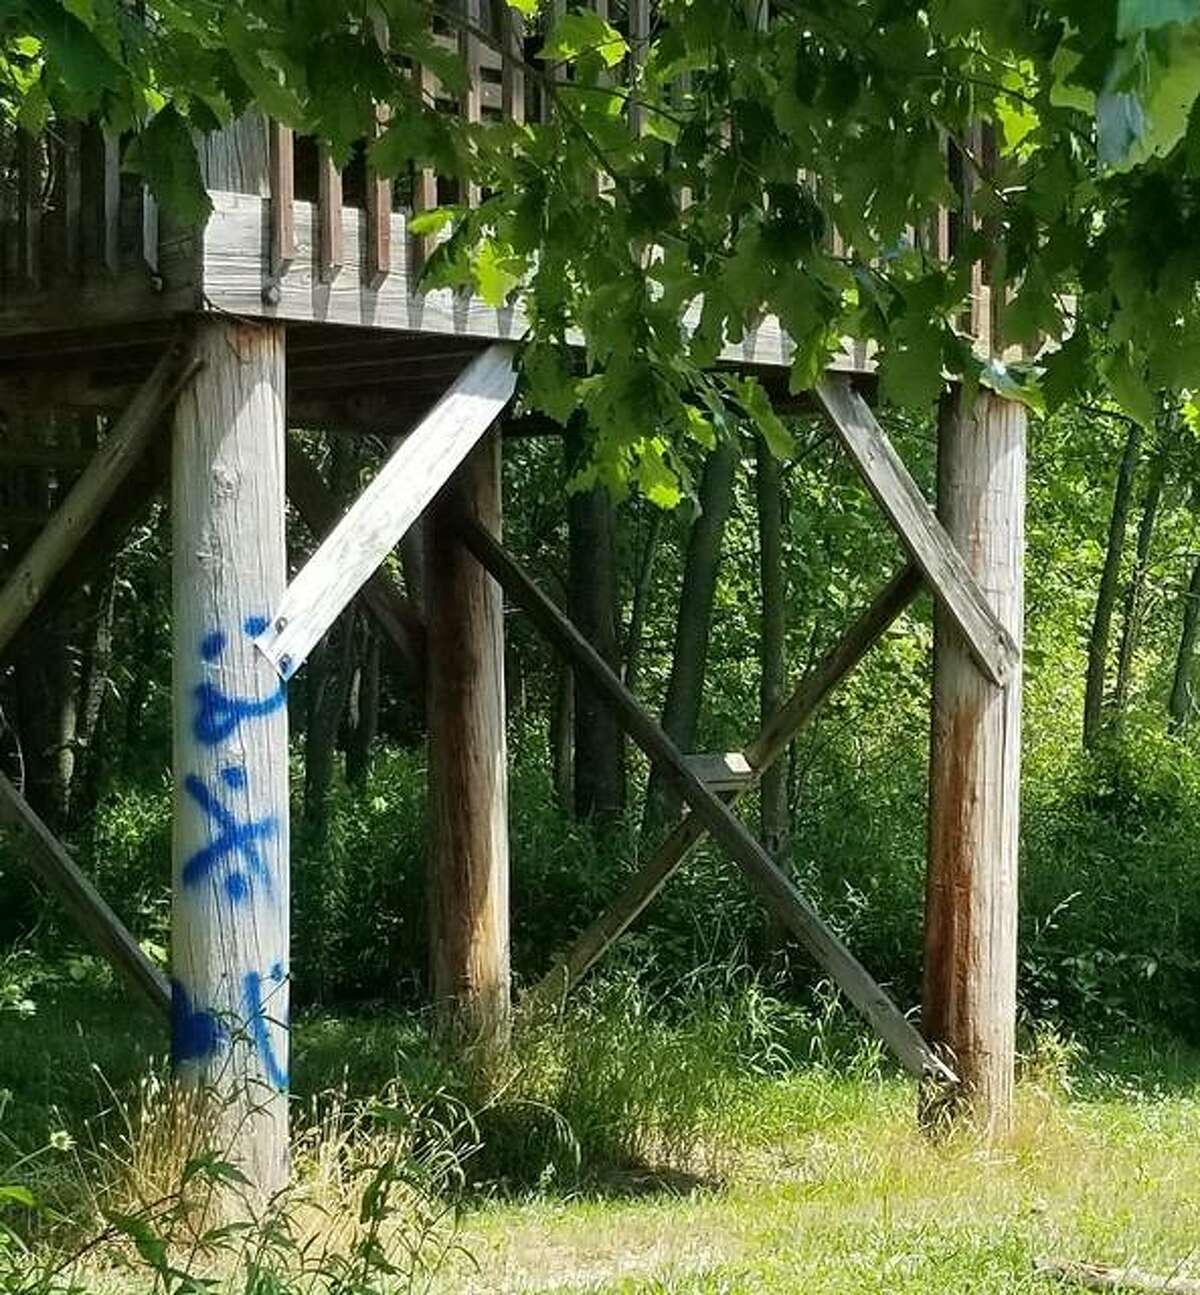 Graffiti appears on a portion of a wooden structure at the Watershed Nature Center, in Edwardsville. This Saturday’s Restoration Day is open to the public to voluntarily help maintain the center from 8 to 11 a.m. Check in at the Welcome Center upon arrival.